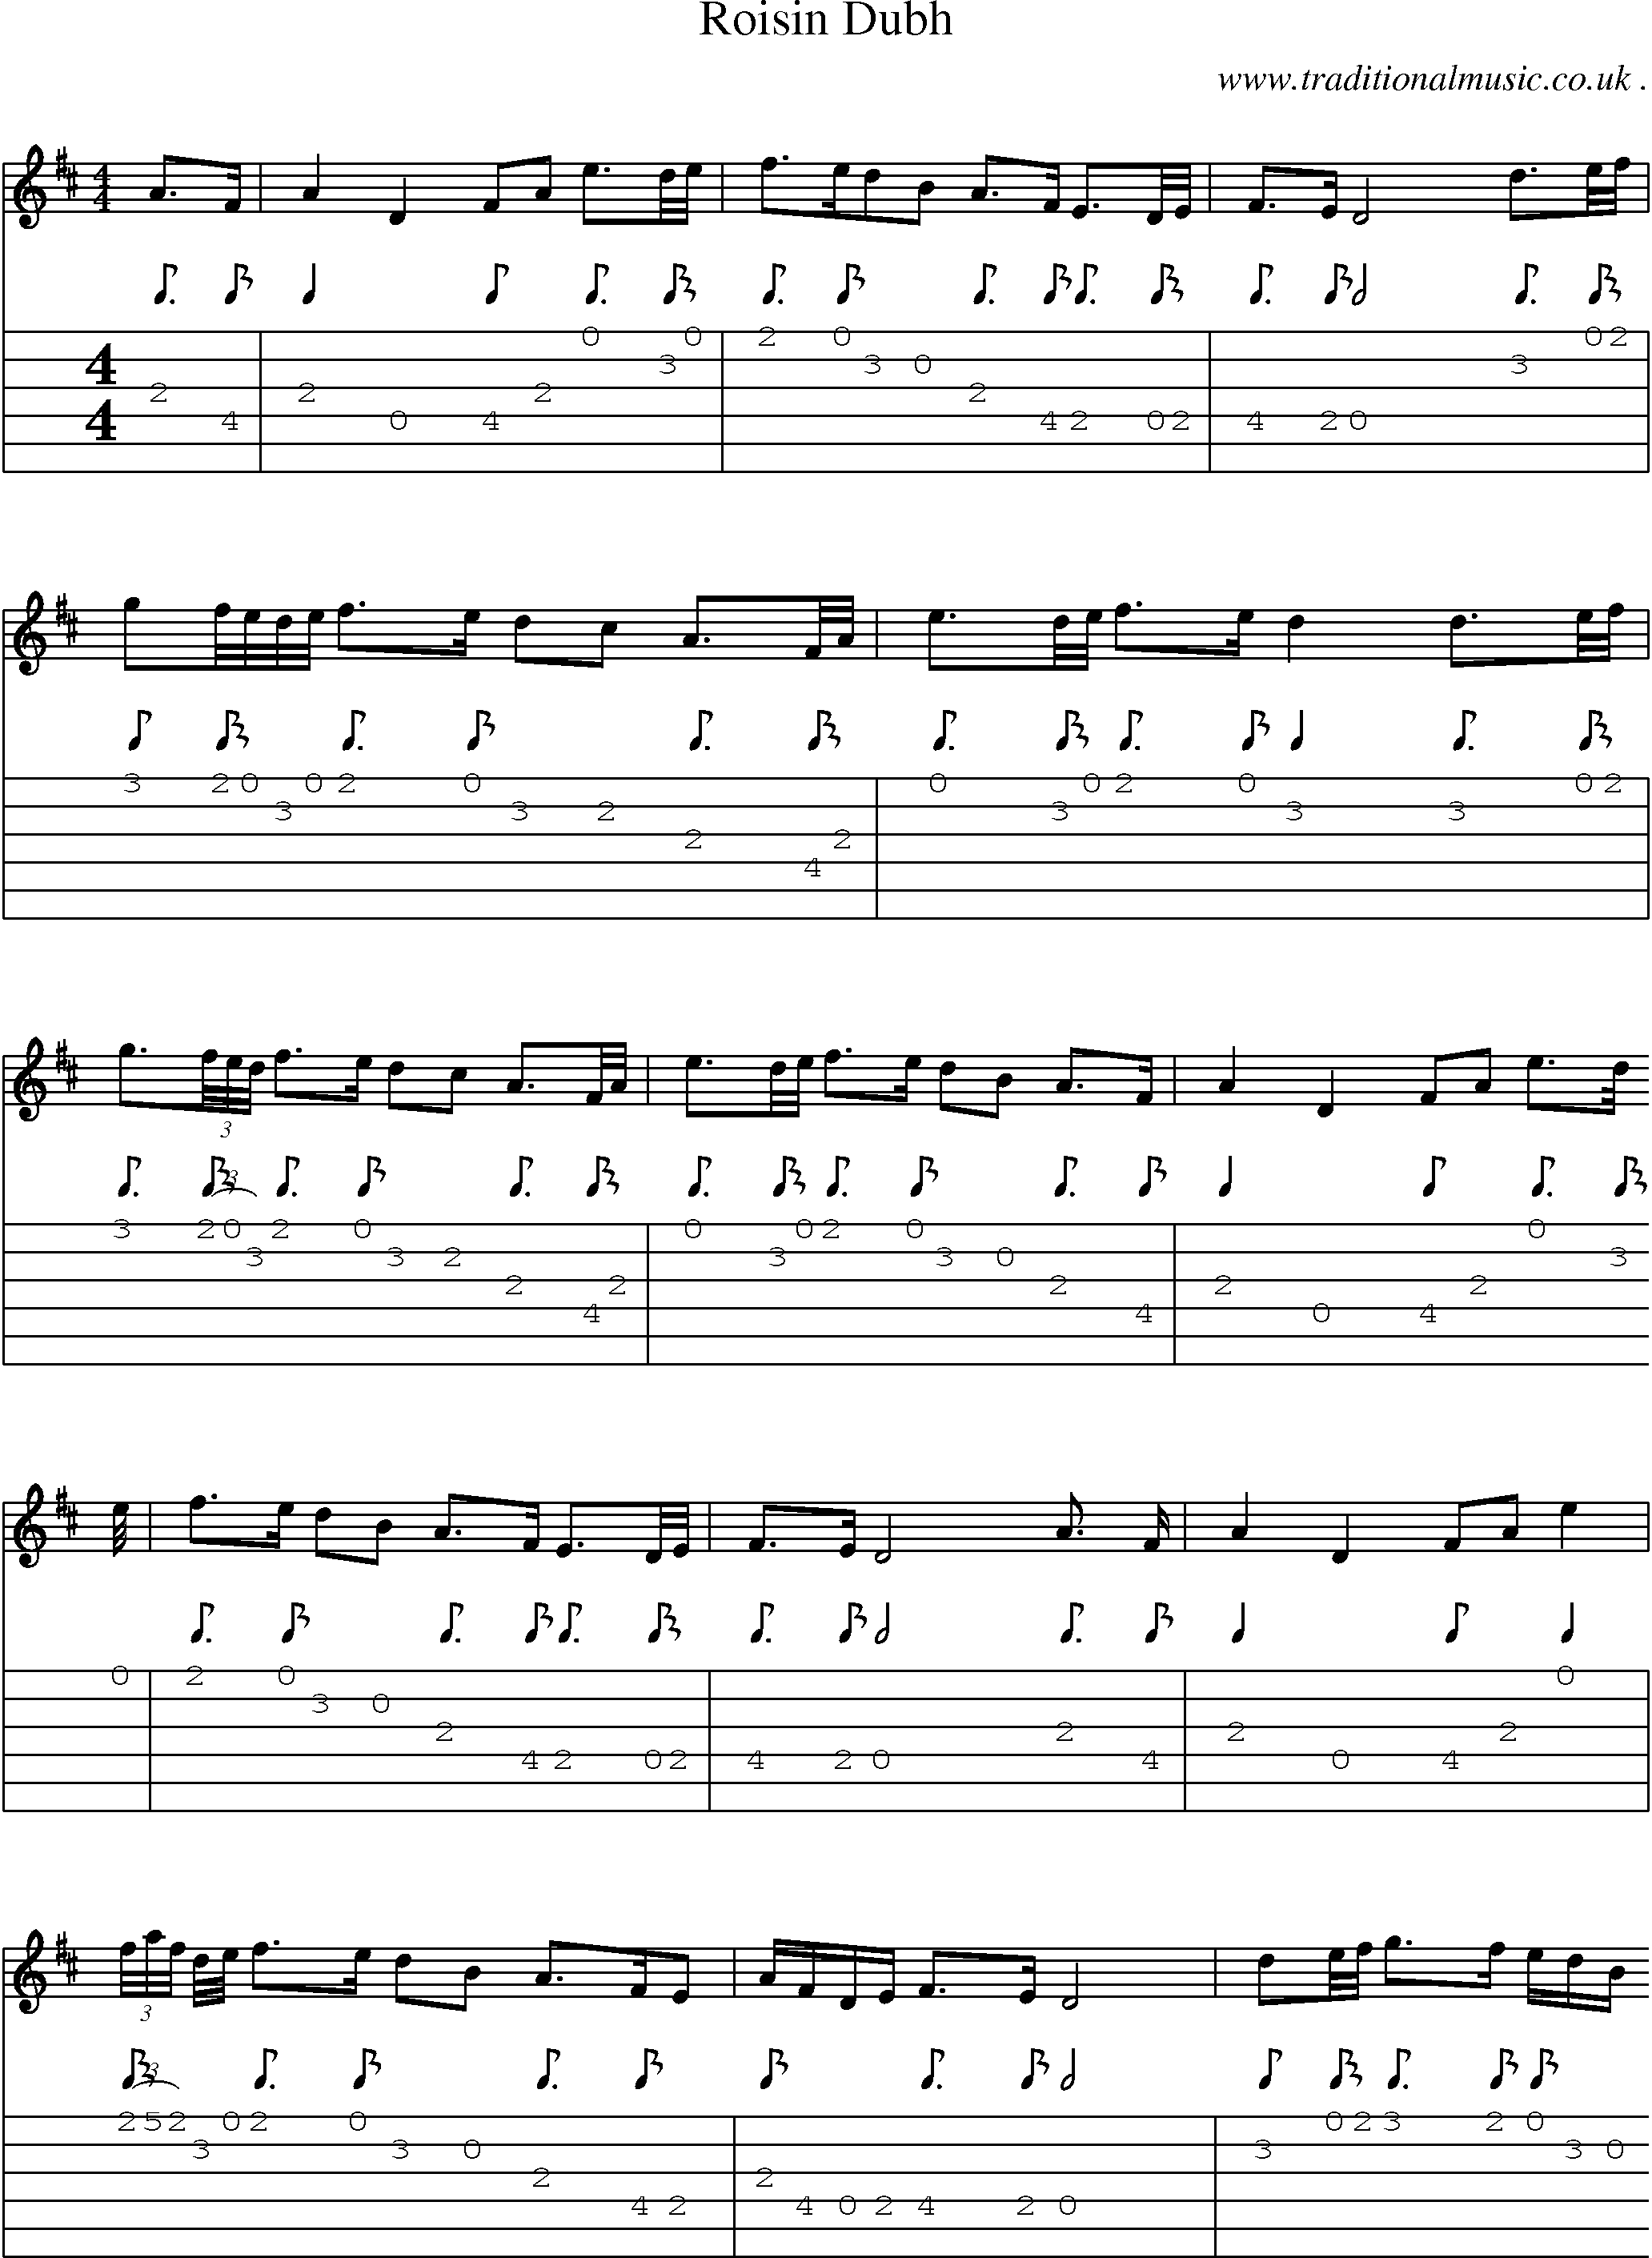 Sheet-Music and Guitar Tabs for Roisin Dubh